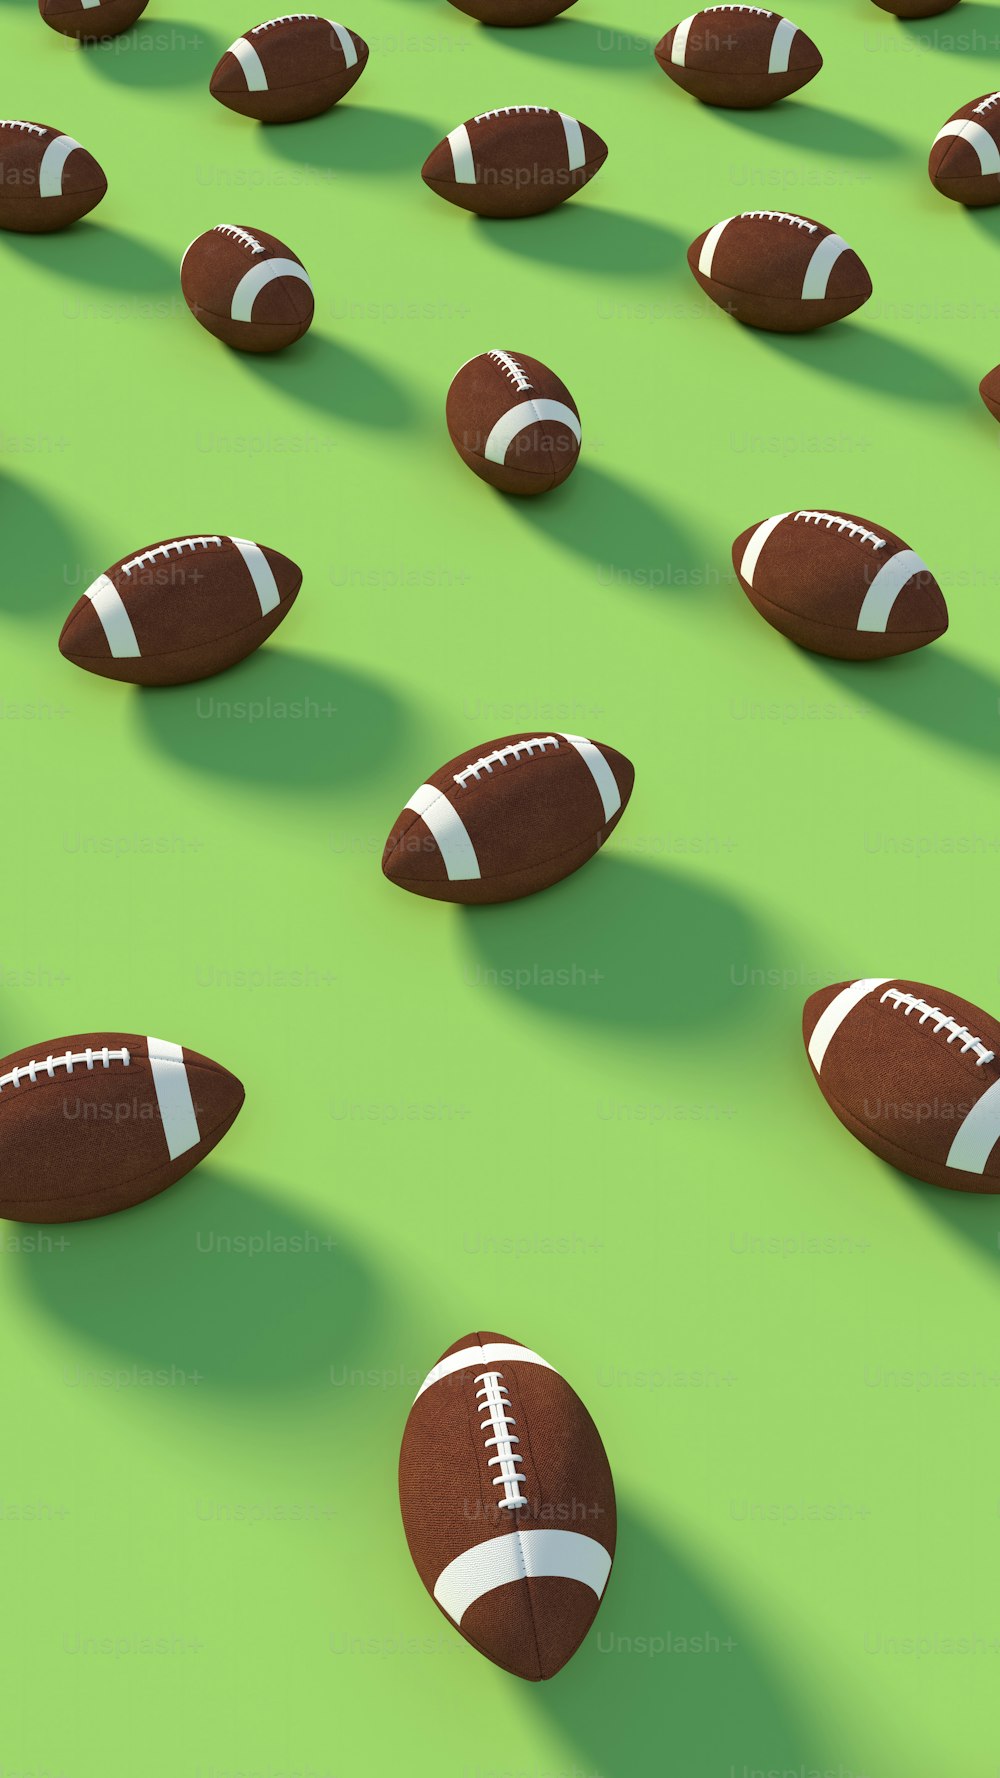 a group of footballs laying on top of a green field